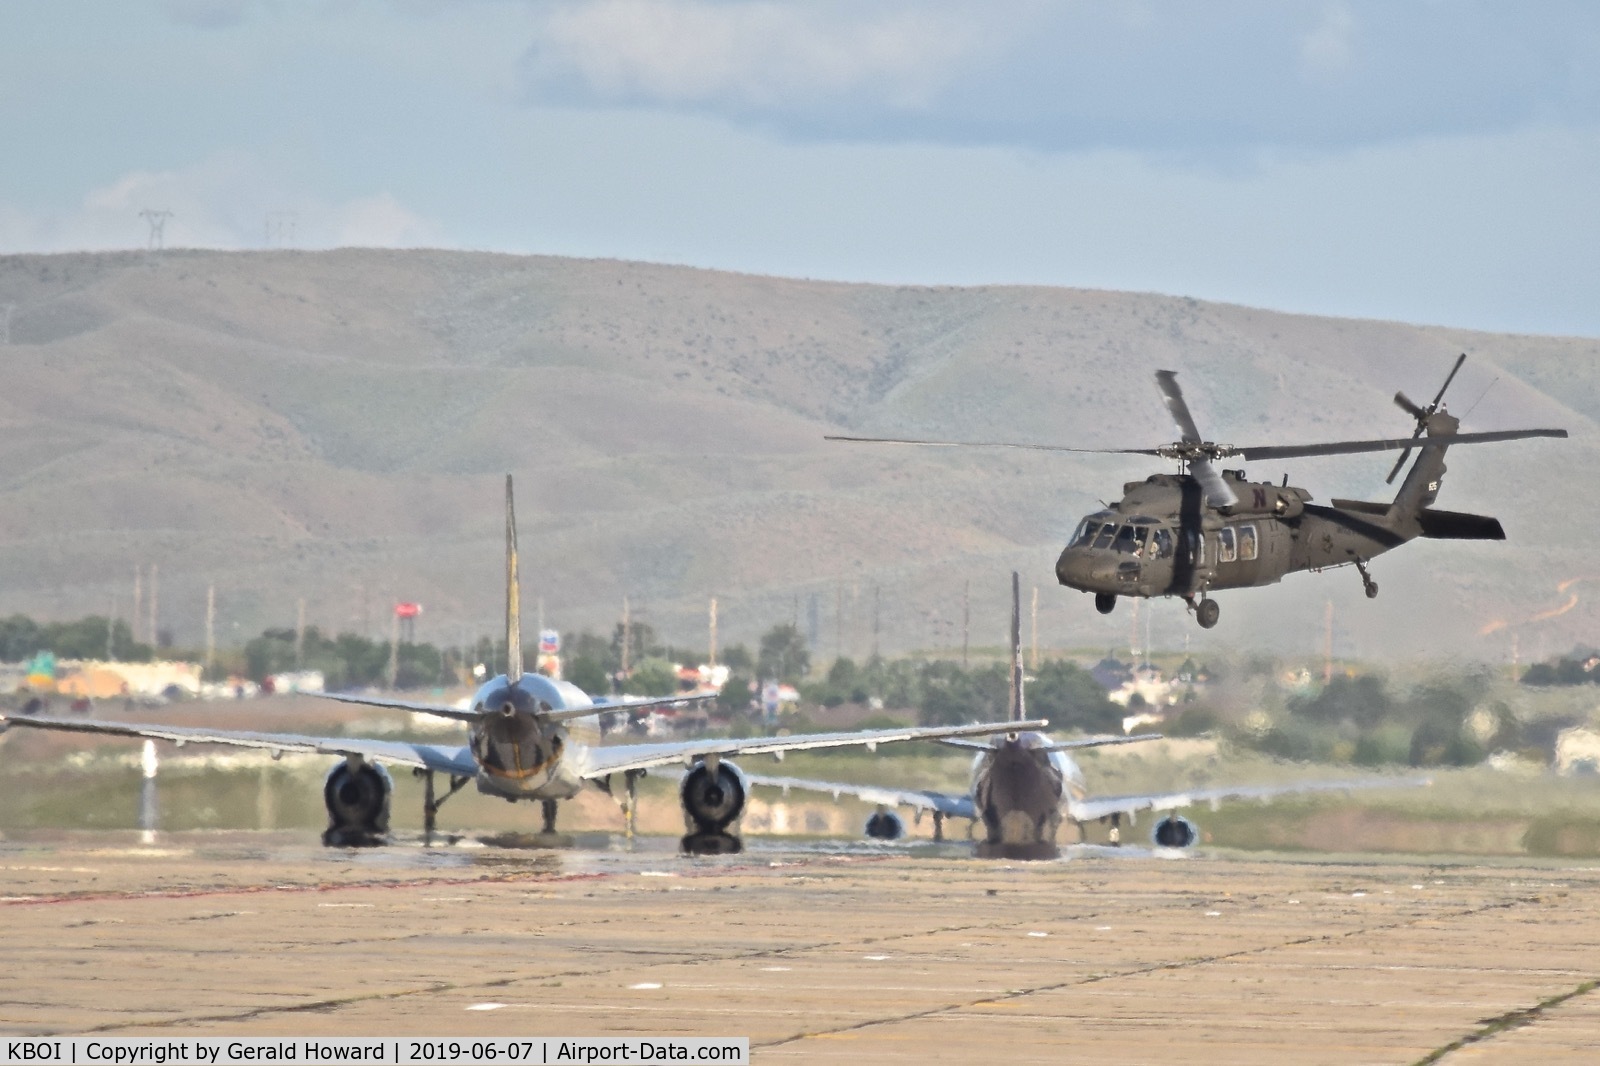 Boise Air Terminal/gowen Fld Airport (BOI) - UH-60A departs on Bravo after UPS & Fed Ex pass by headed for RWY 28L.